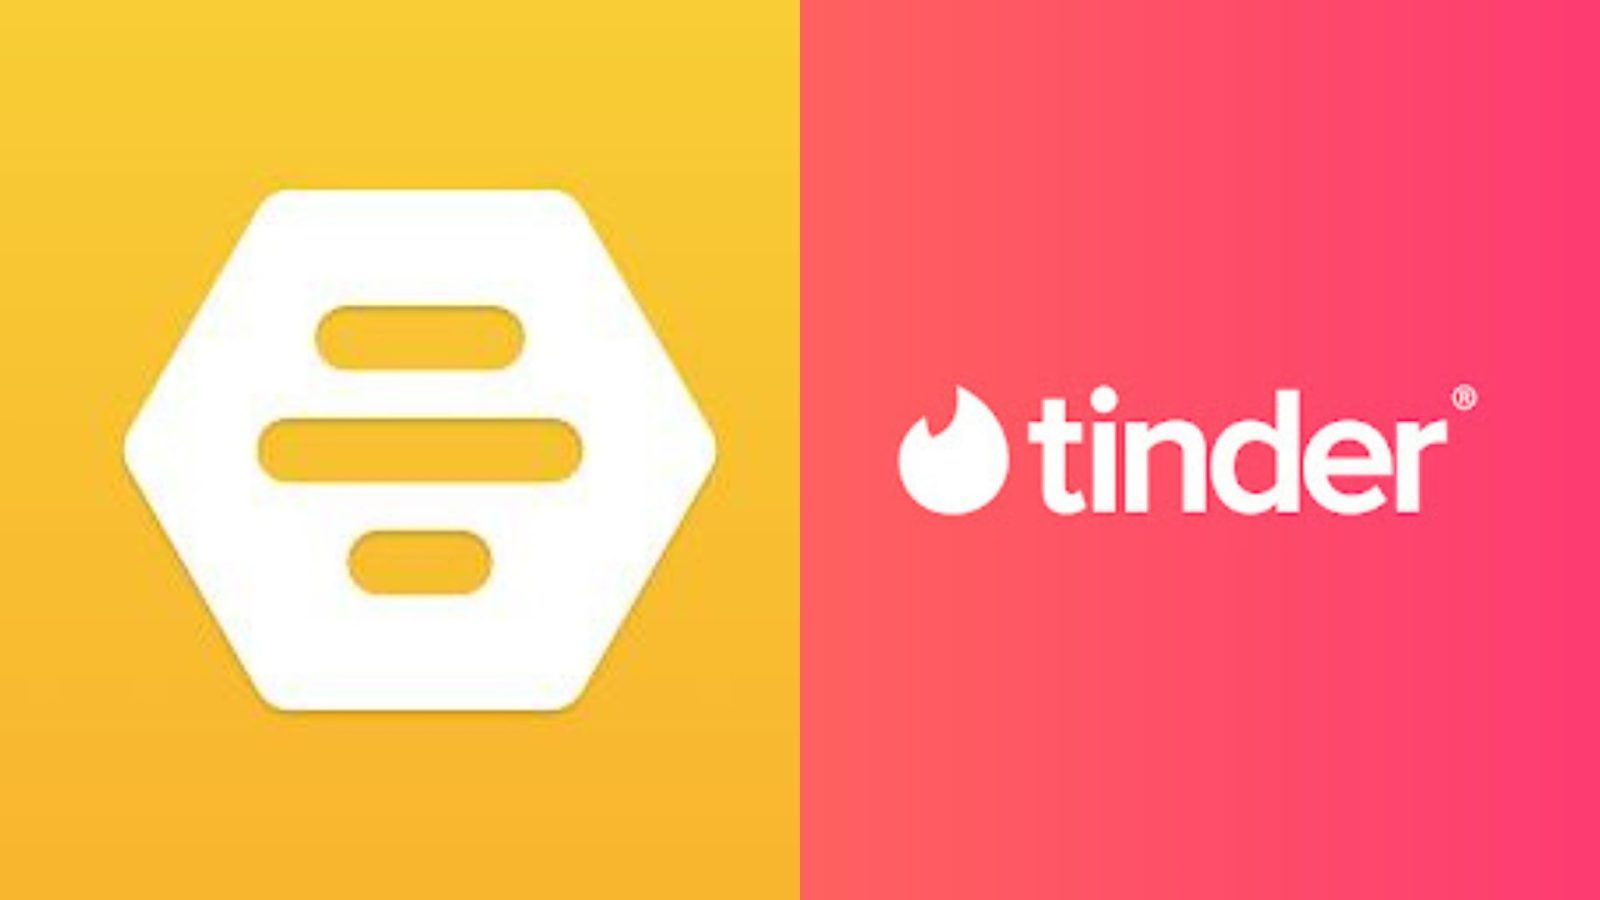 Tinder Vs Bumble Weighing The Pros And Cons Of Dating Apps